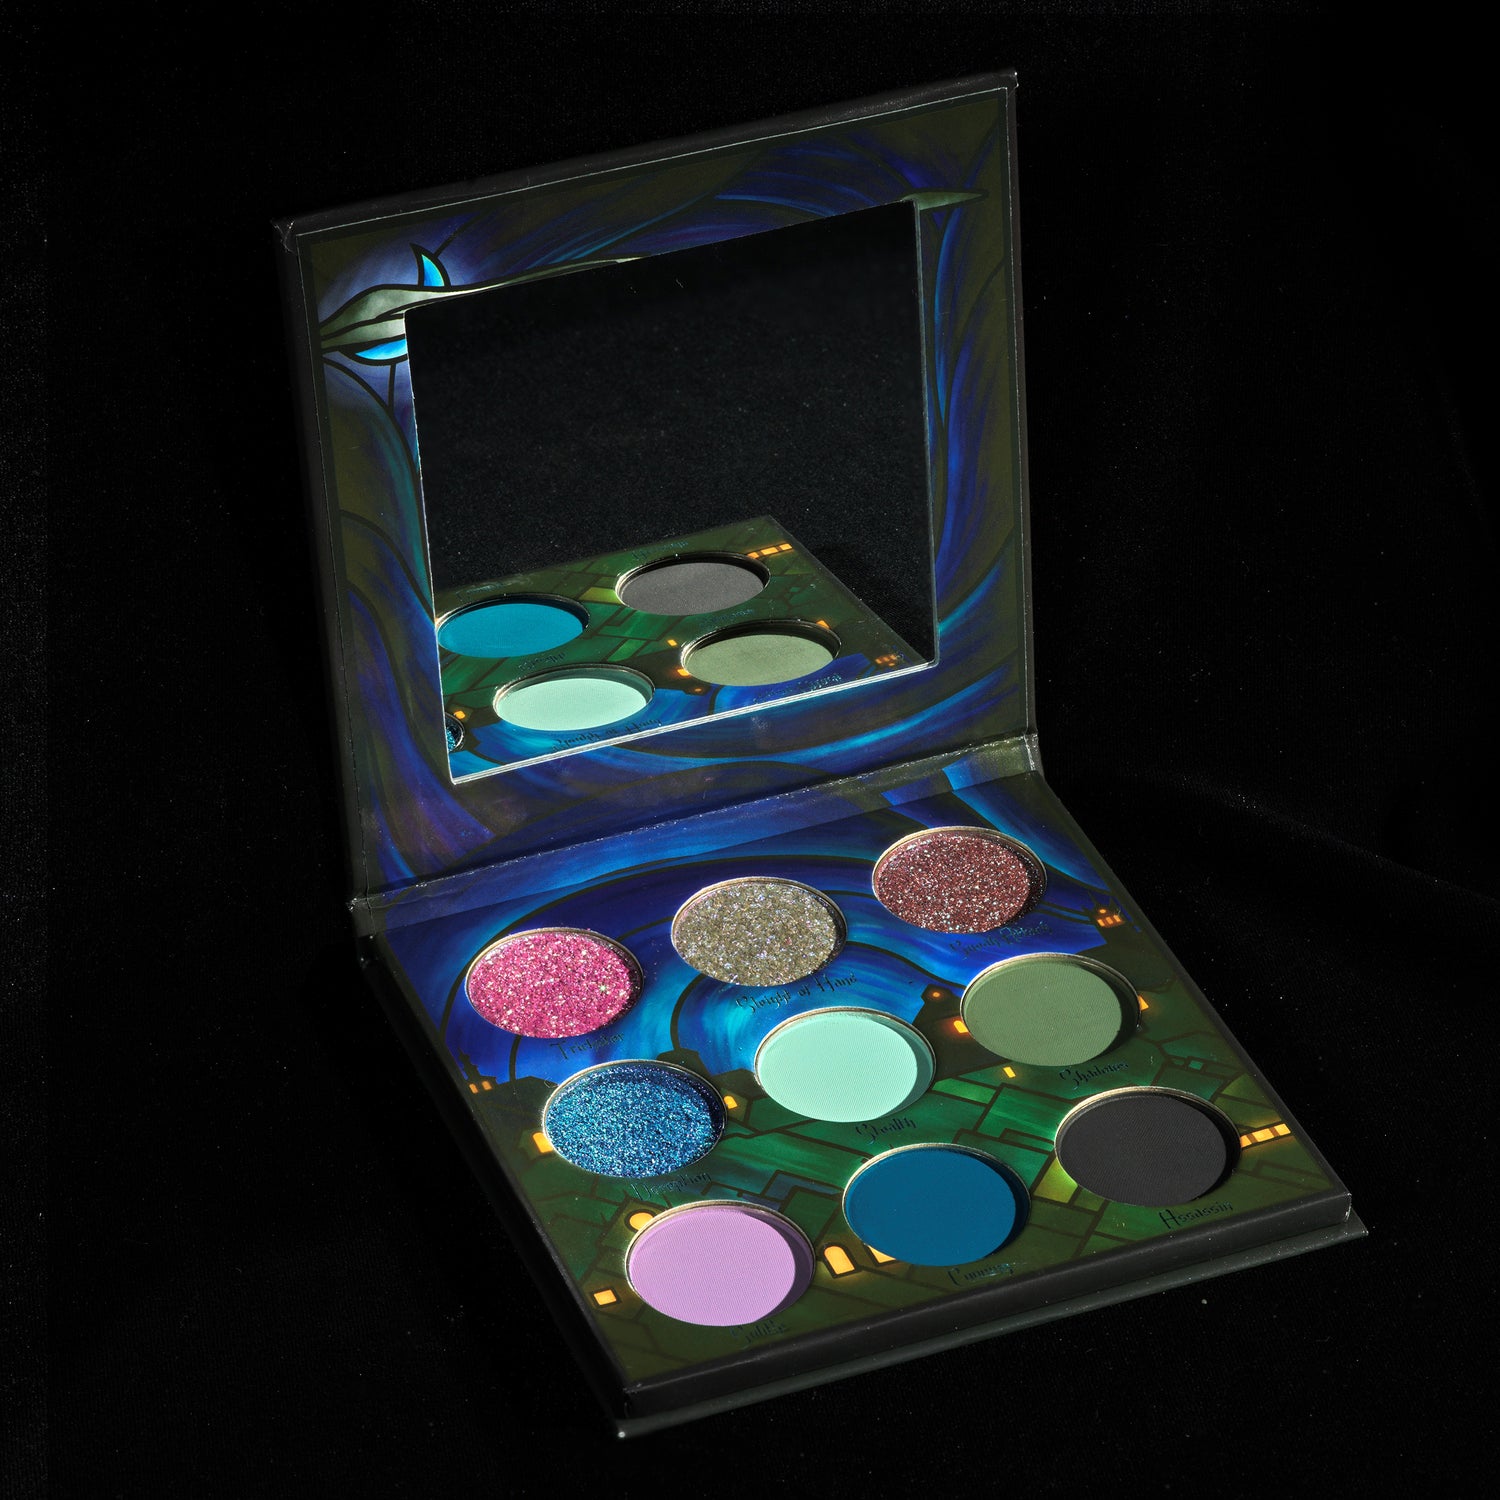 Rogue eyeshadow palette by Fantasy Cosmetica opened